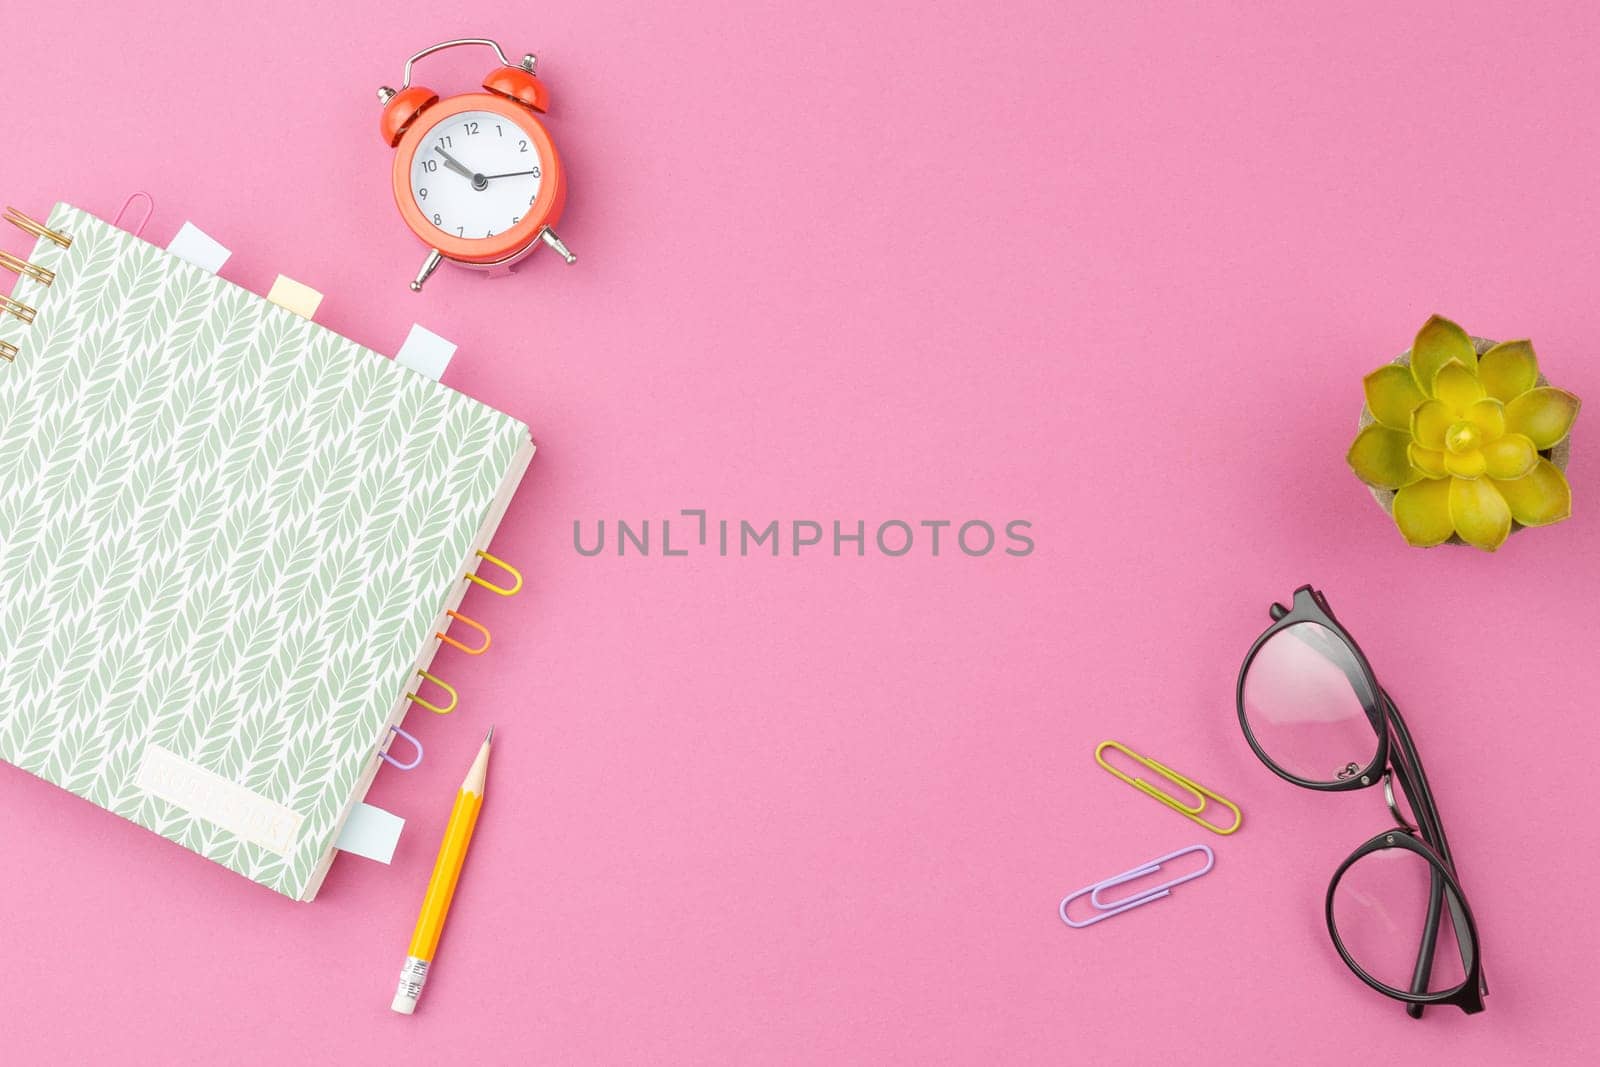 Spiral notebook with foliage ornament, bookmarks from paper clips and sheets for notes, glasses, pencil, alarm clock and a flower in a pot on a pink background. Top view.